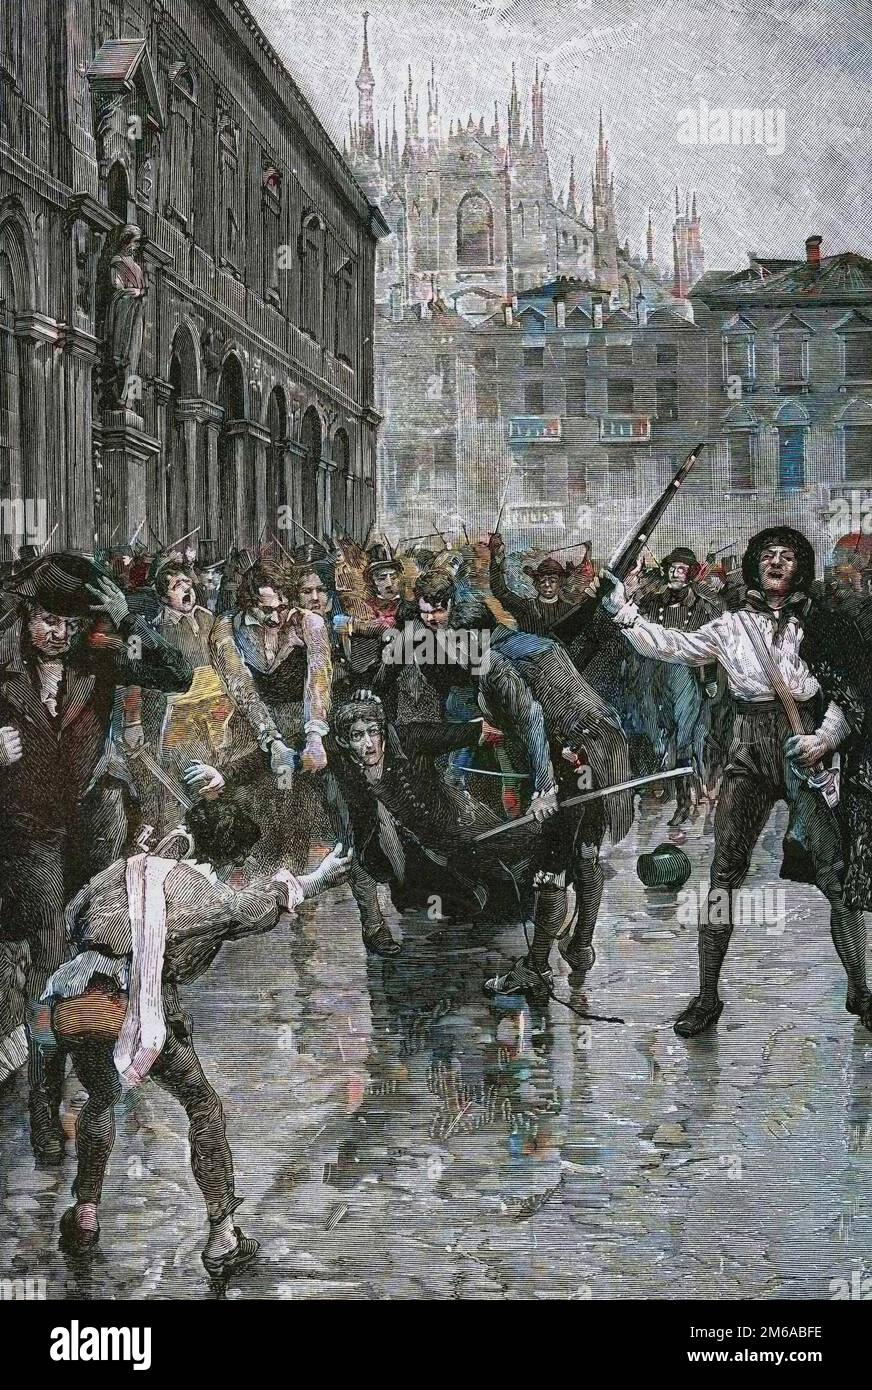 Napoleon's abdication encourages riots in Milano, and Giuseppe Prina, the unpopular finance minister, is dragged round the streets and finally killed by the mob in Piazza San Fedele in Milan, April 20, 1814 - Le 20 avril 1814, la population pille la maison du ministre des Finances Giuseppe Prina sur la piazza San Fedele lors de la chute de Napoleon Ier - Stock Photo